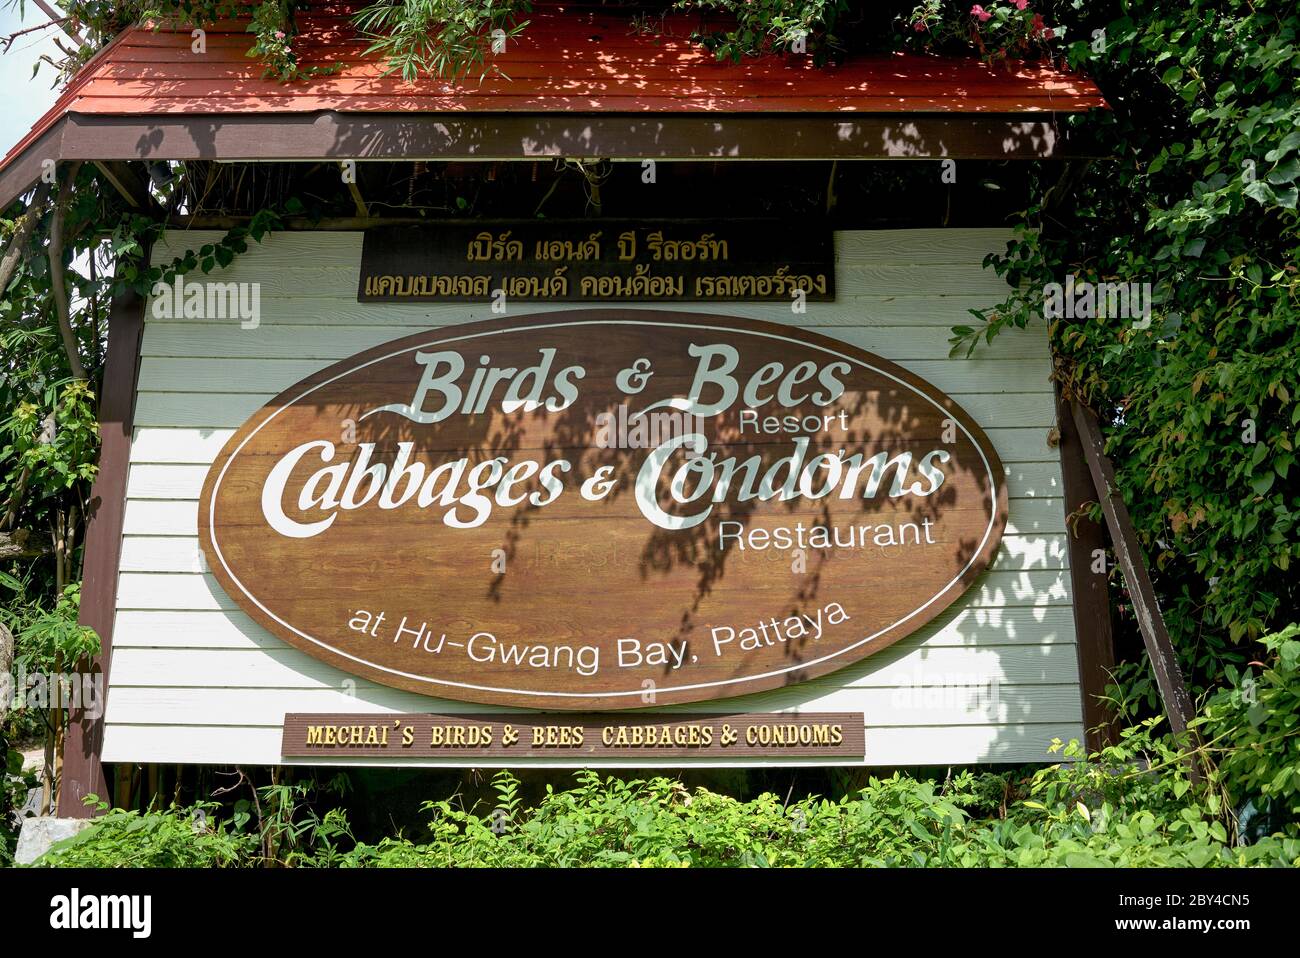 Cabbages and Condoms sign board, Pattaya, Thailand Stock Photo